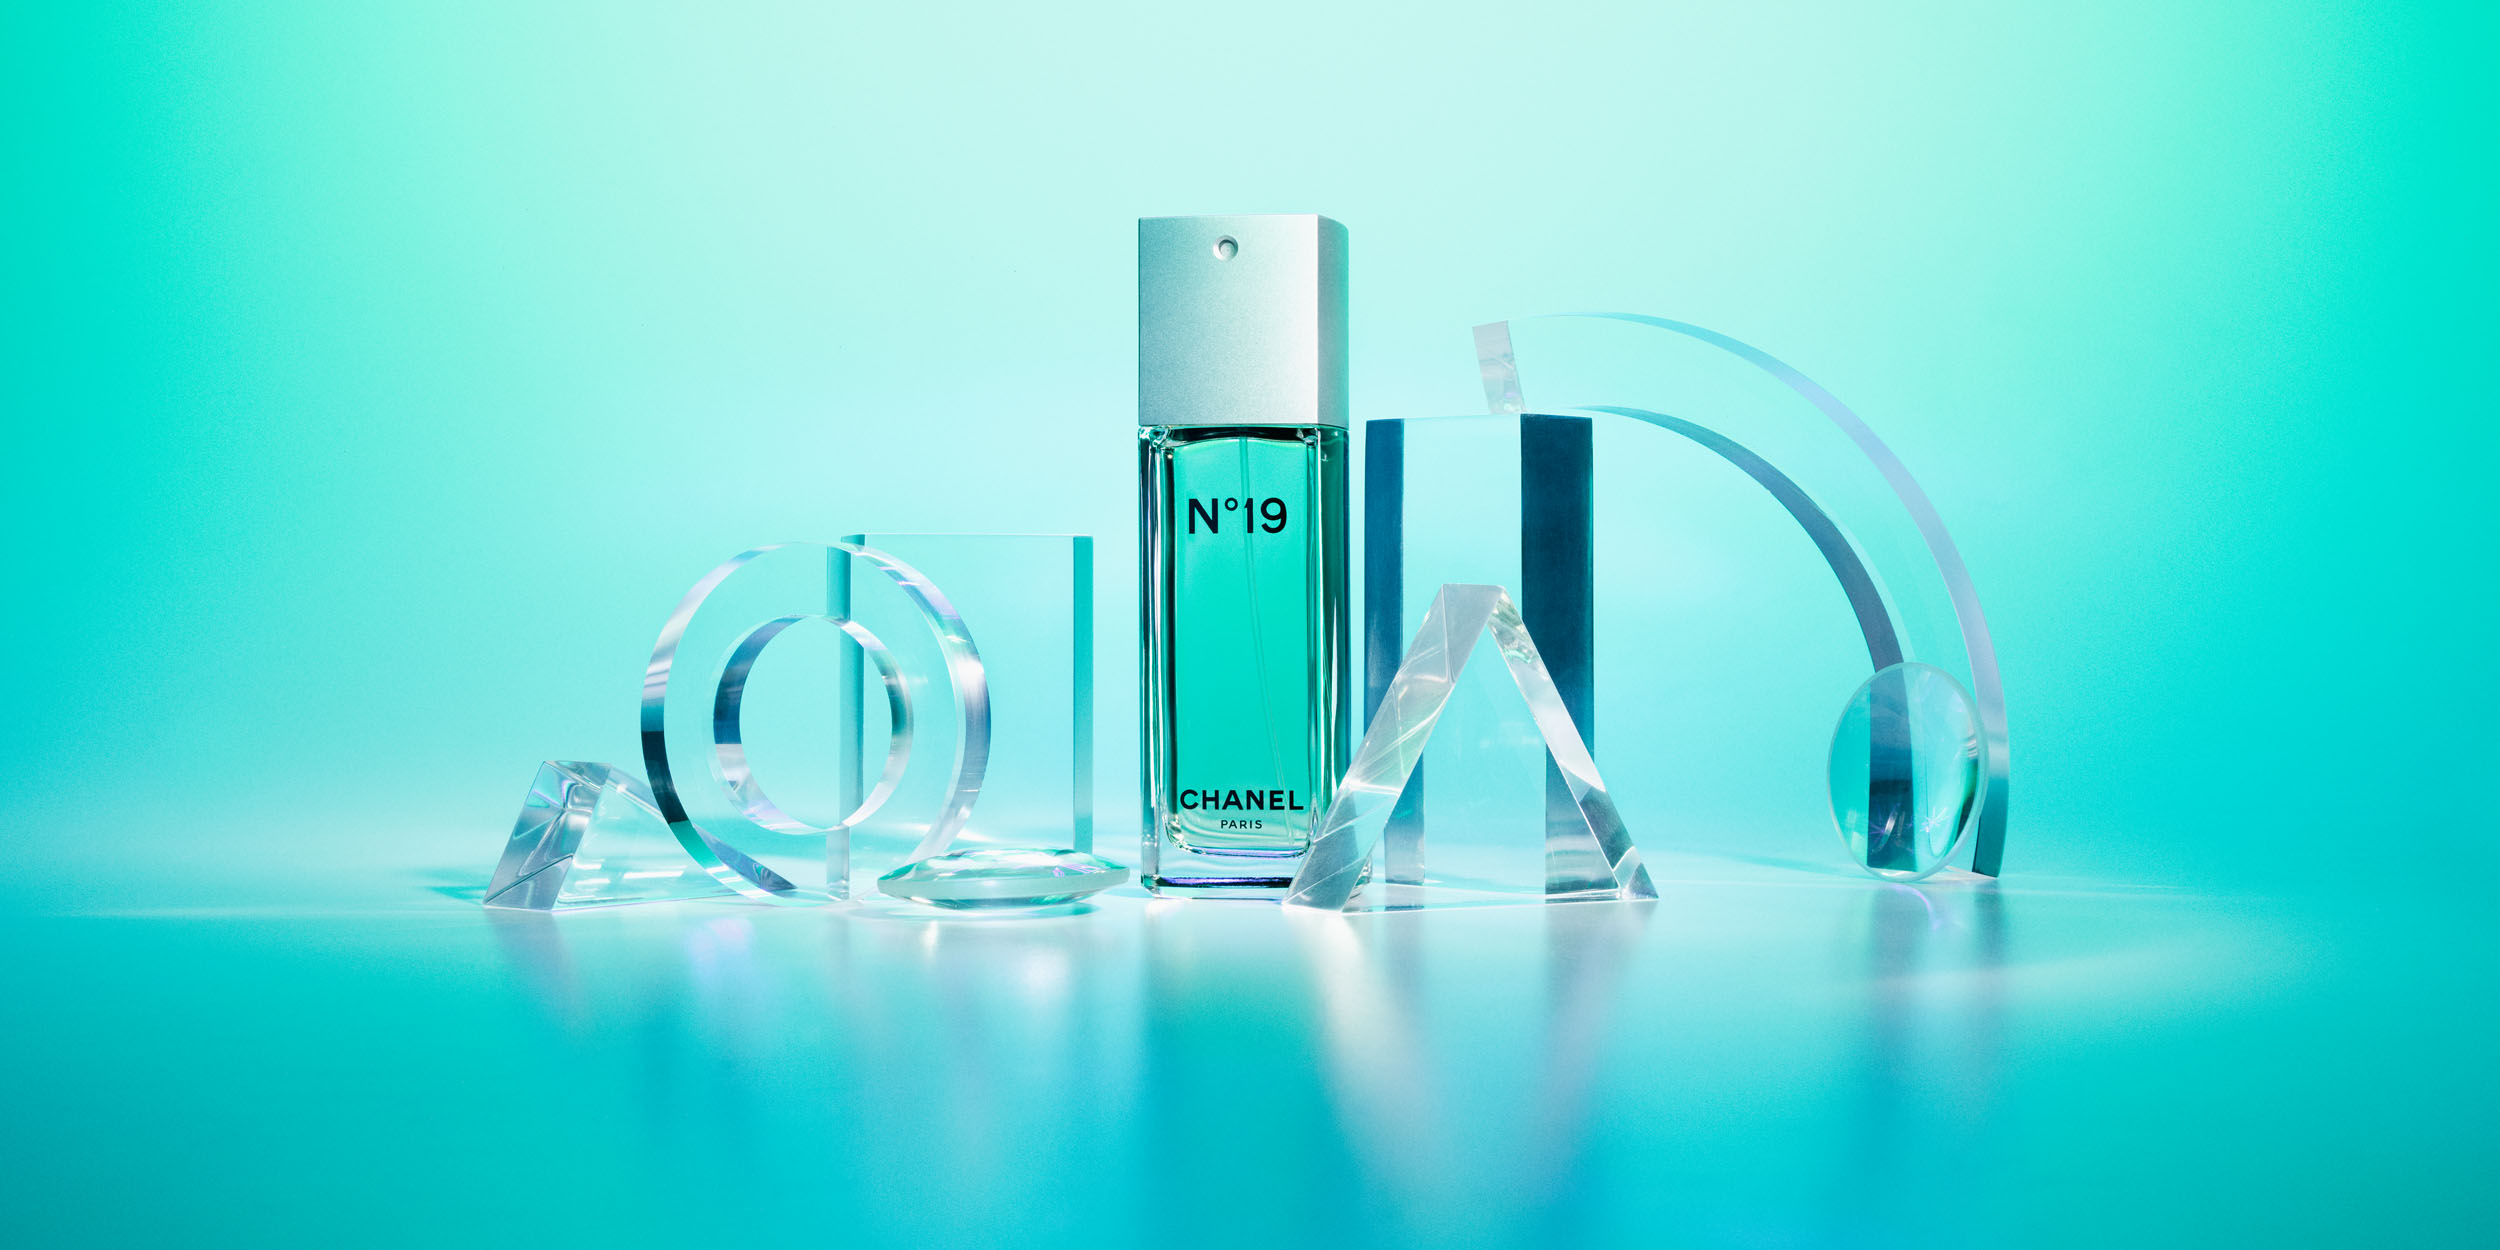 No 19 perfume with perspex blocks by Alexander Kent London based still life and product photographer.